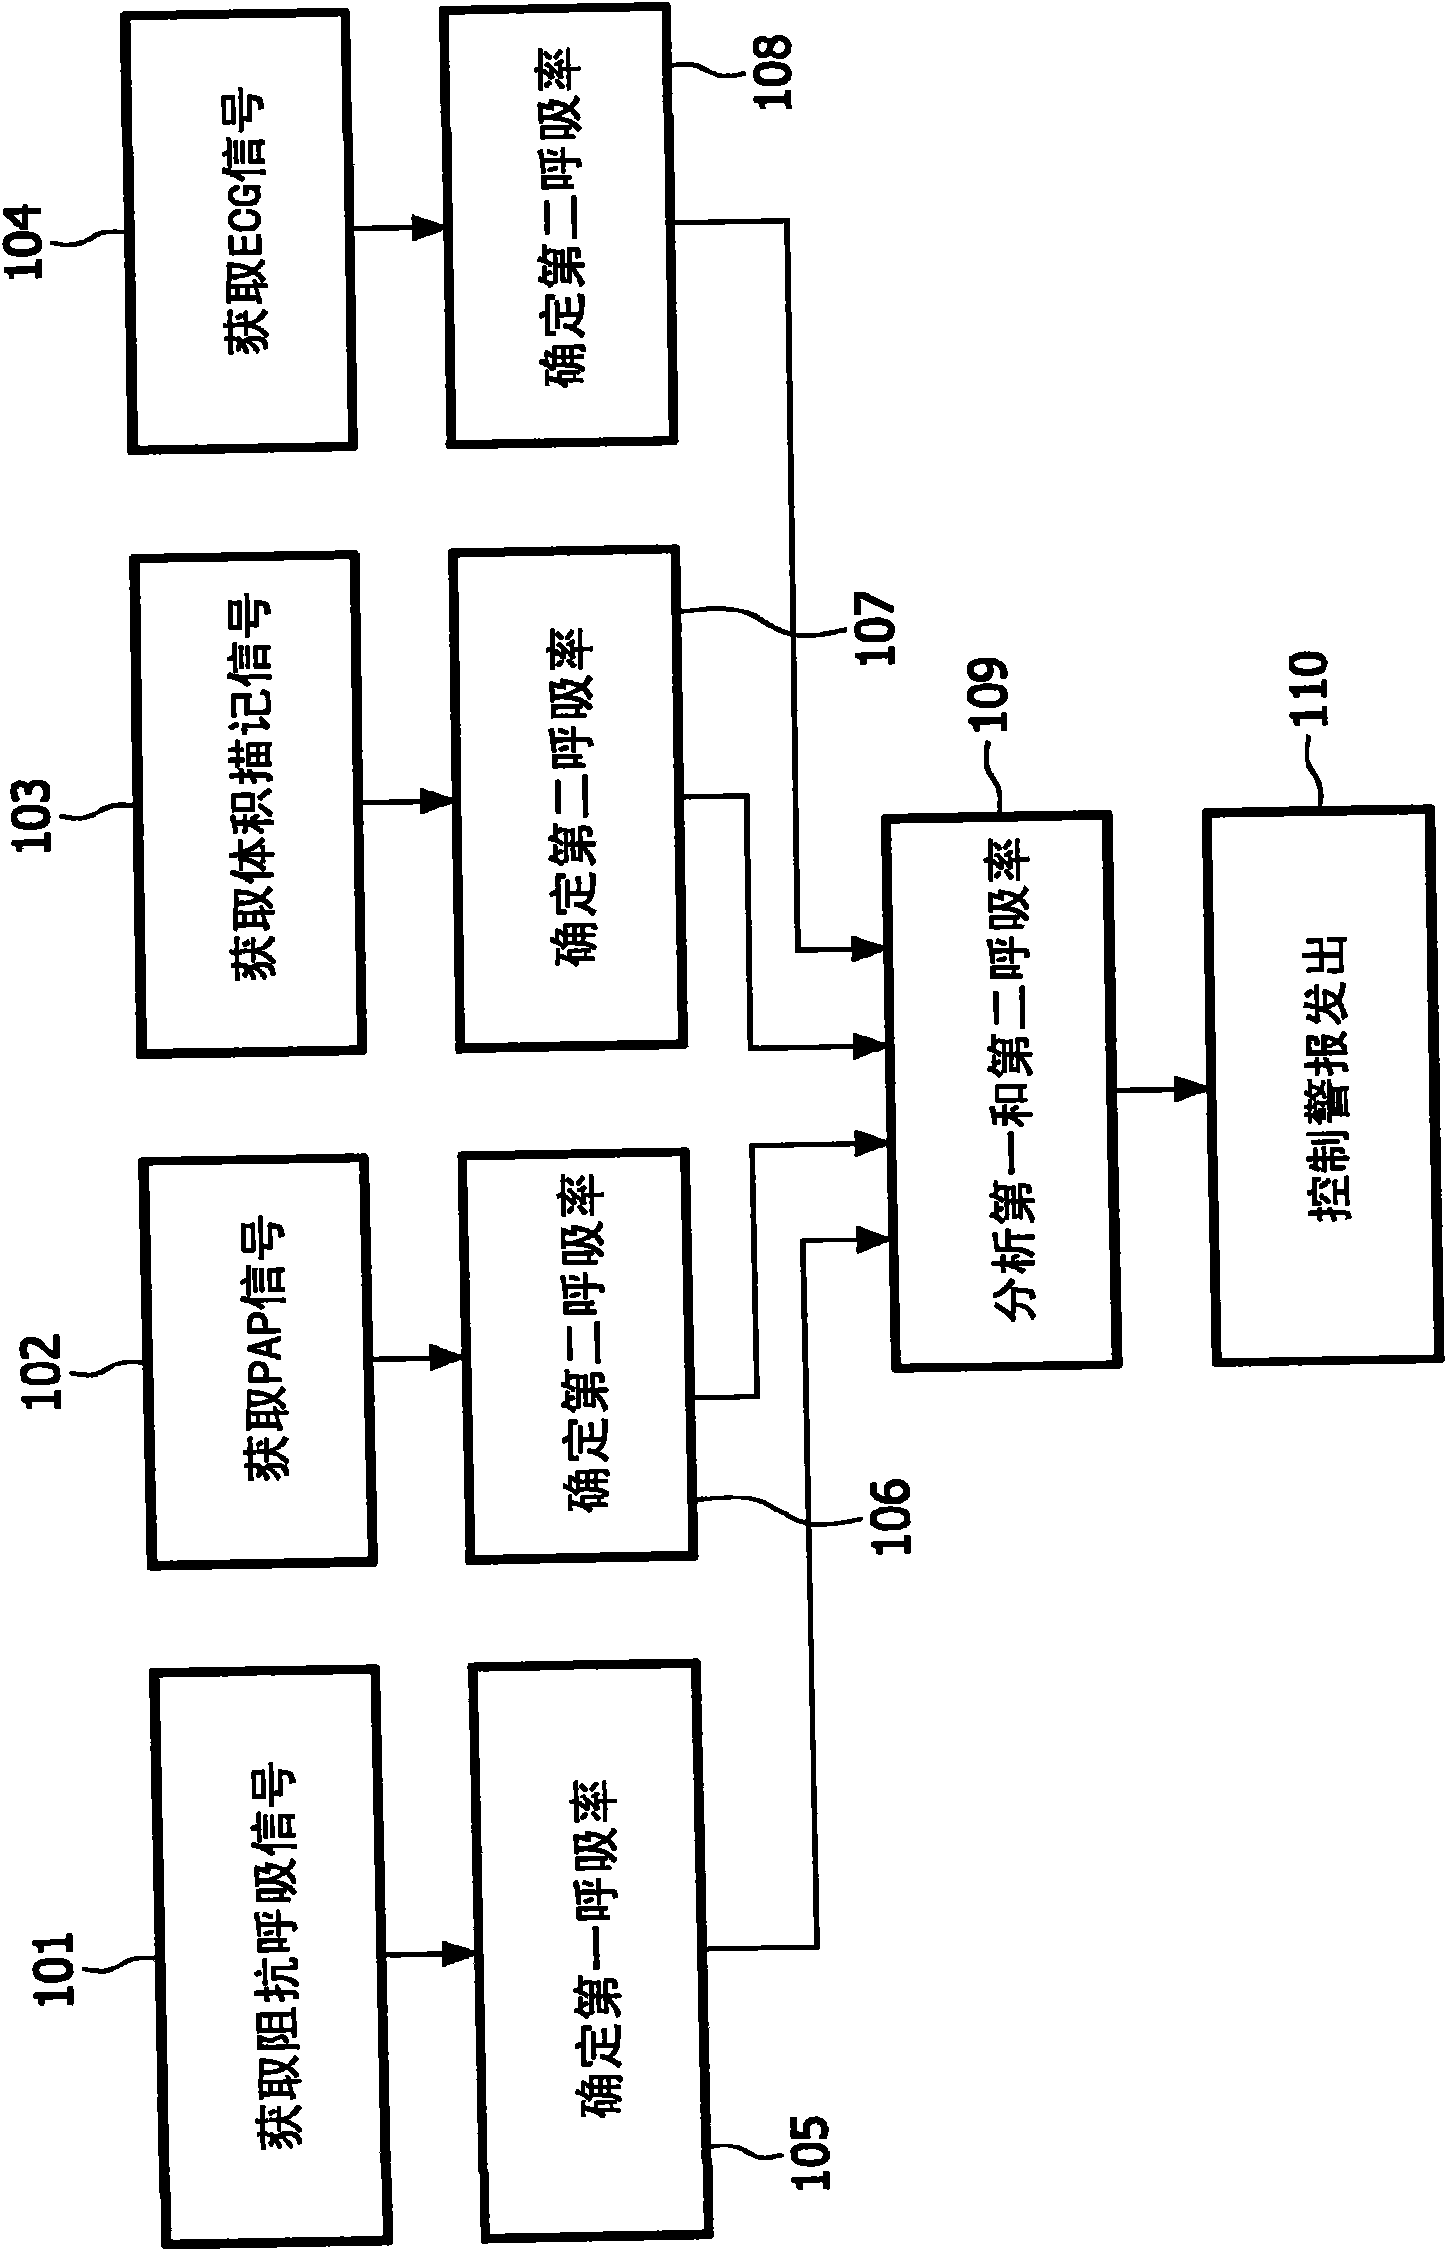 Patient monitoring system and method